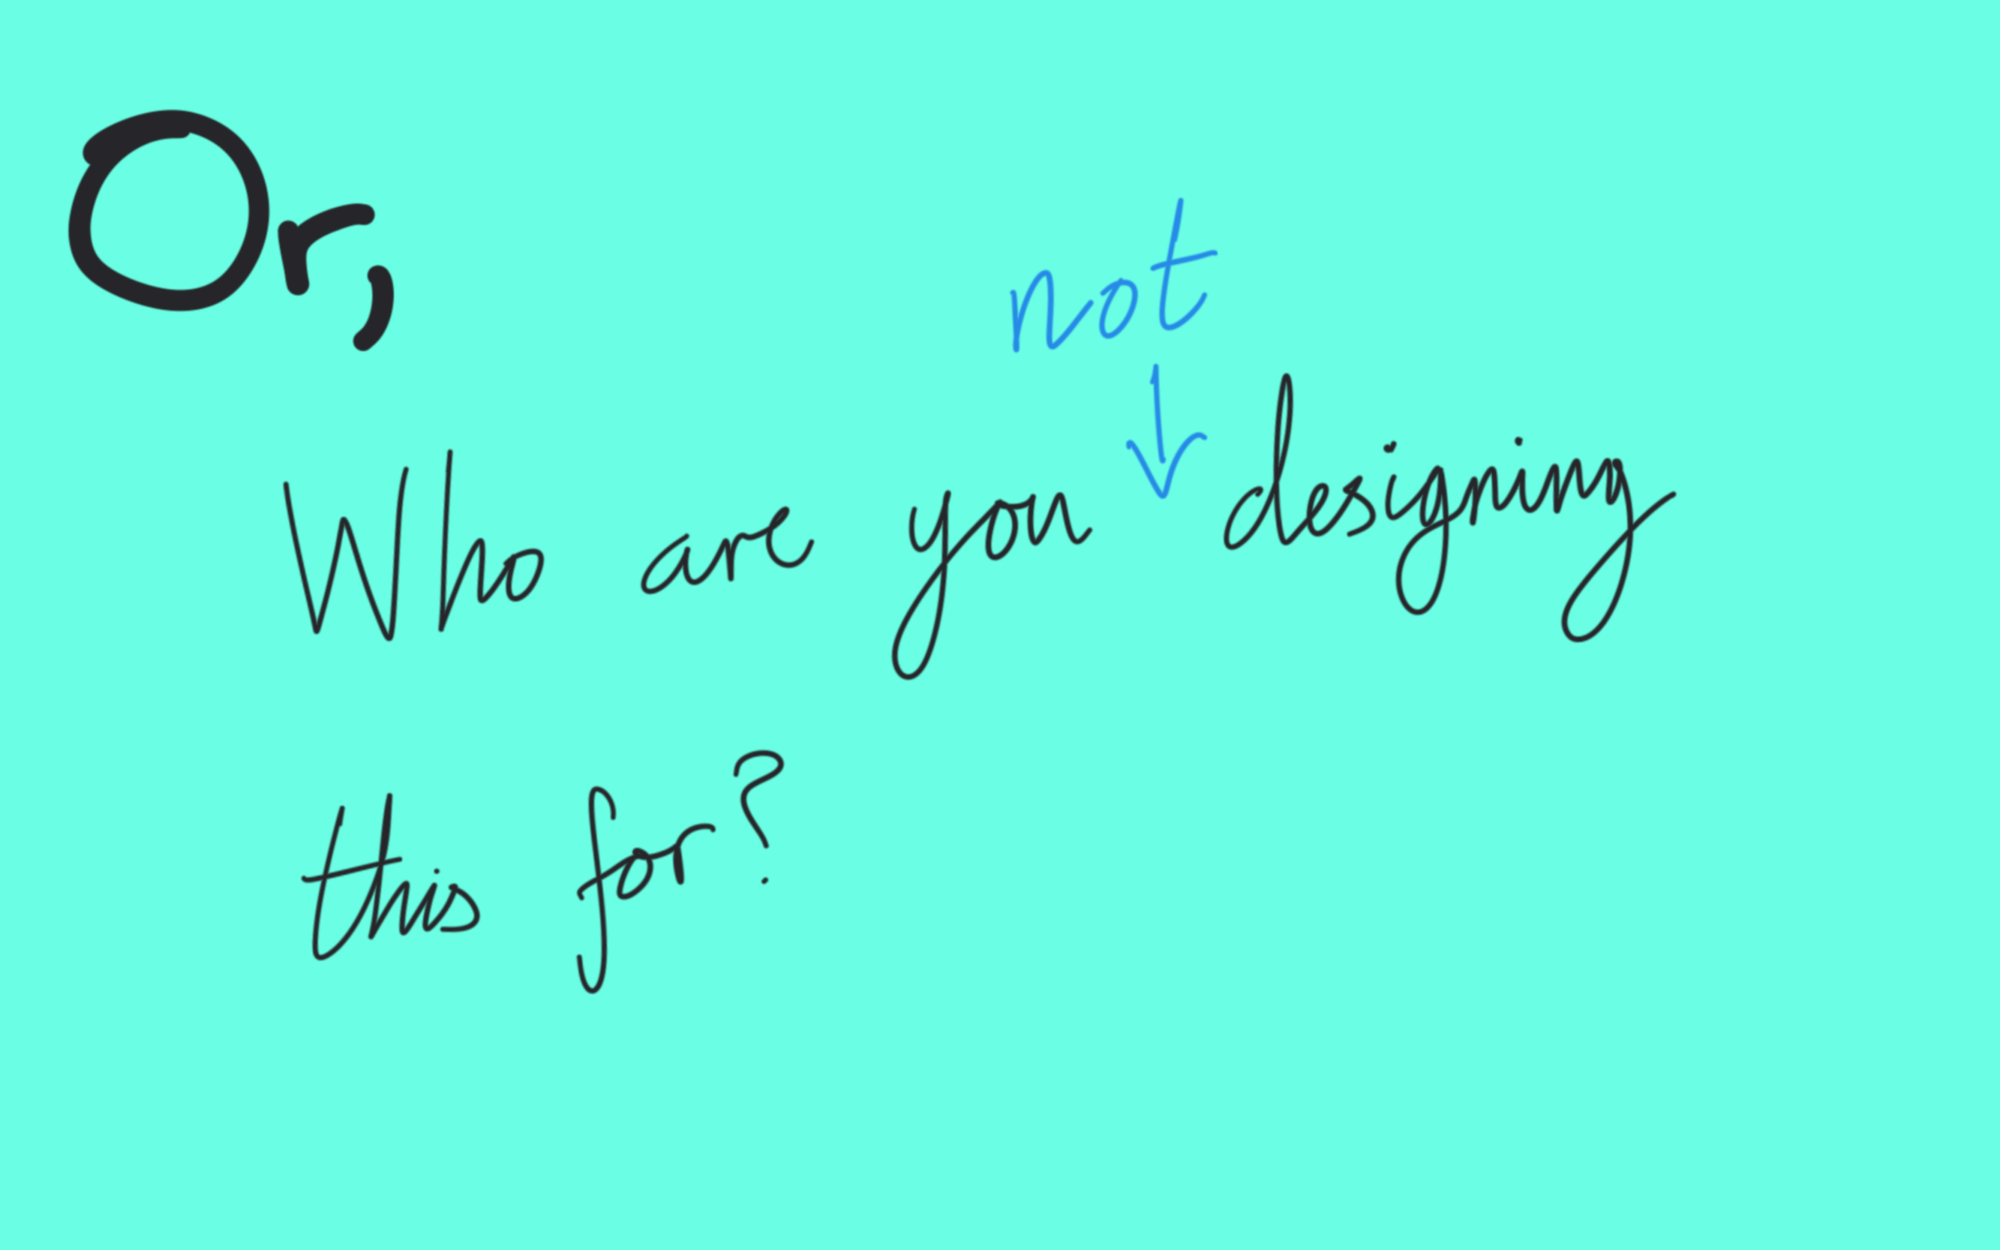 Or, who are you not designing for?